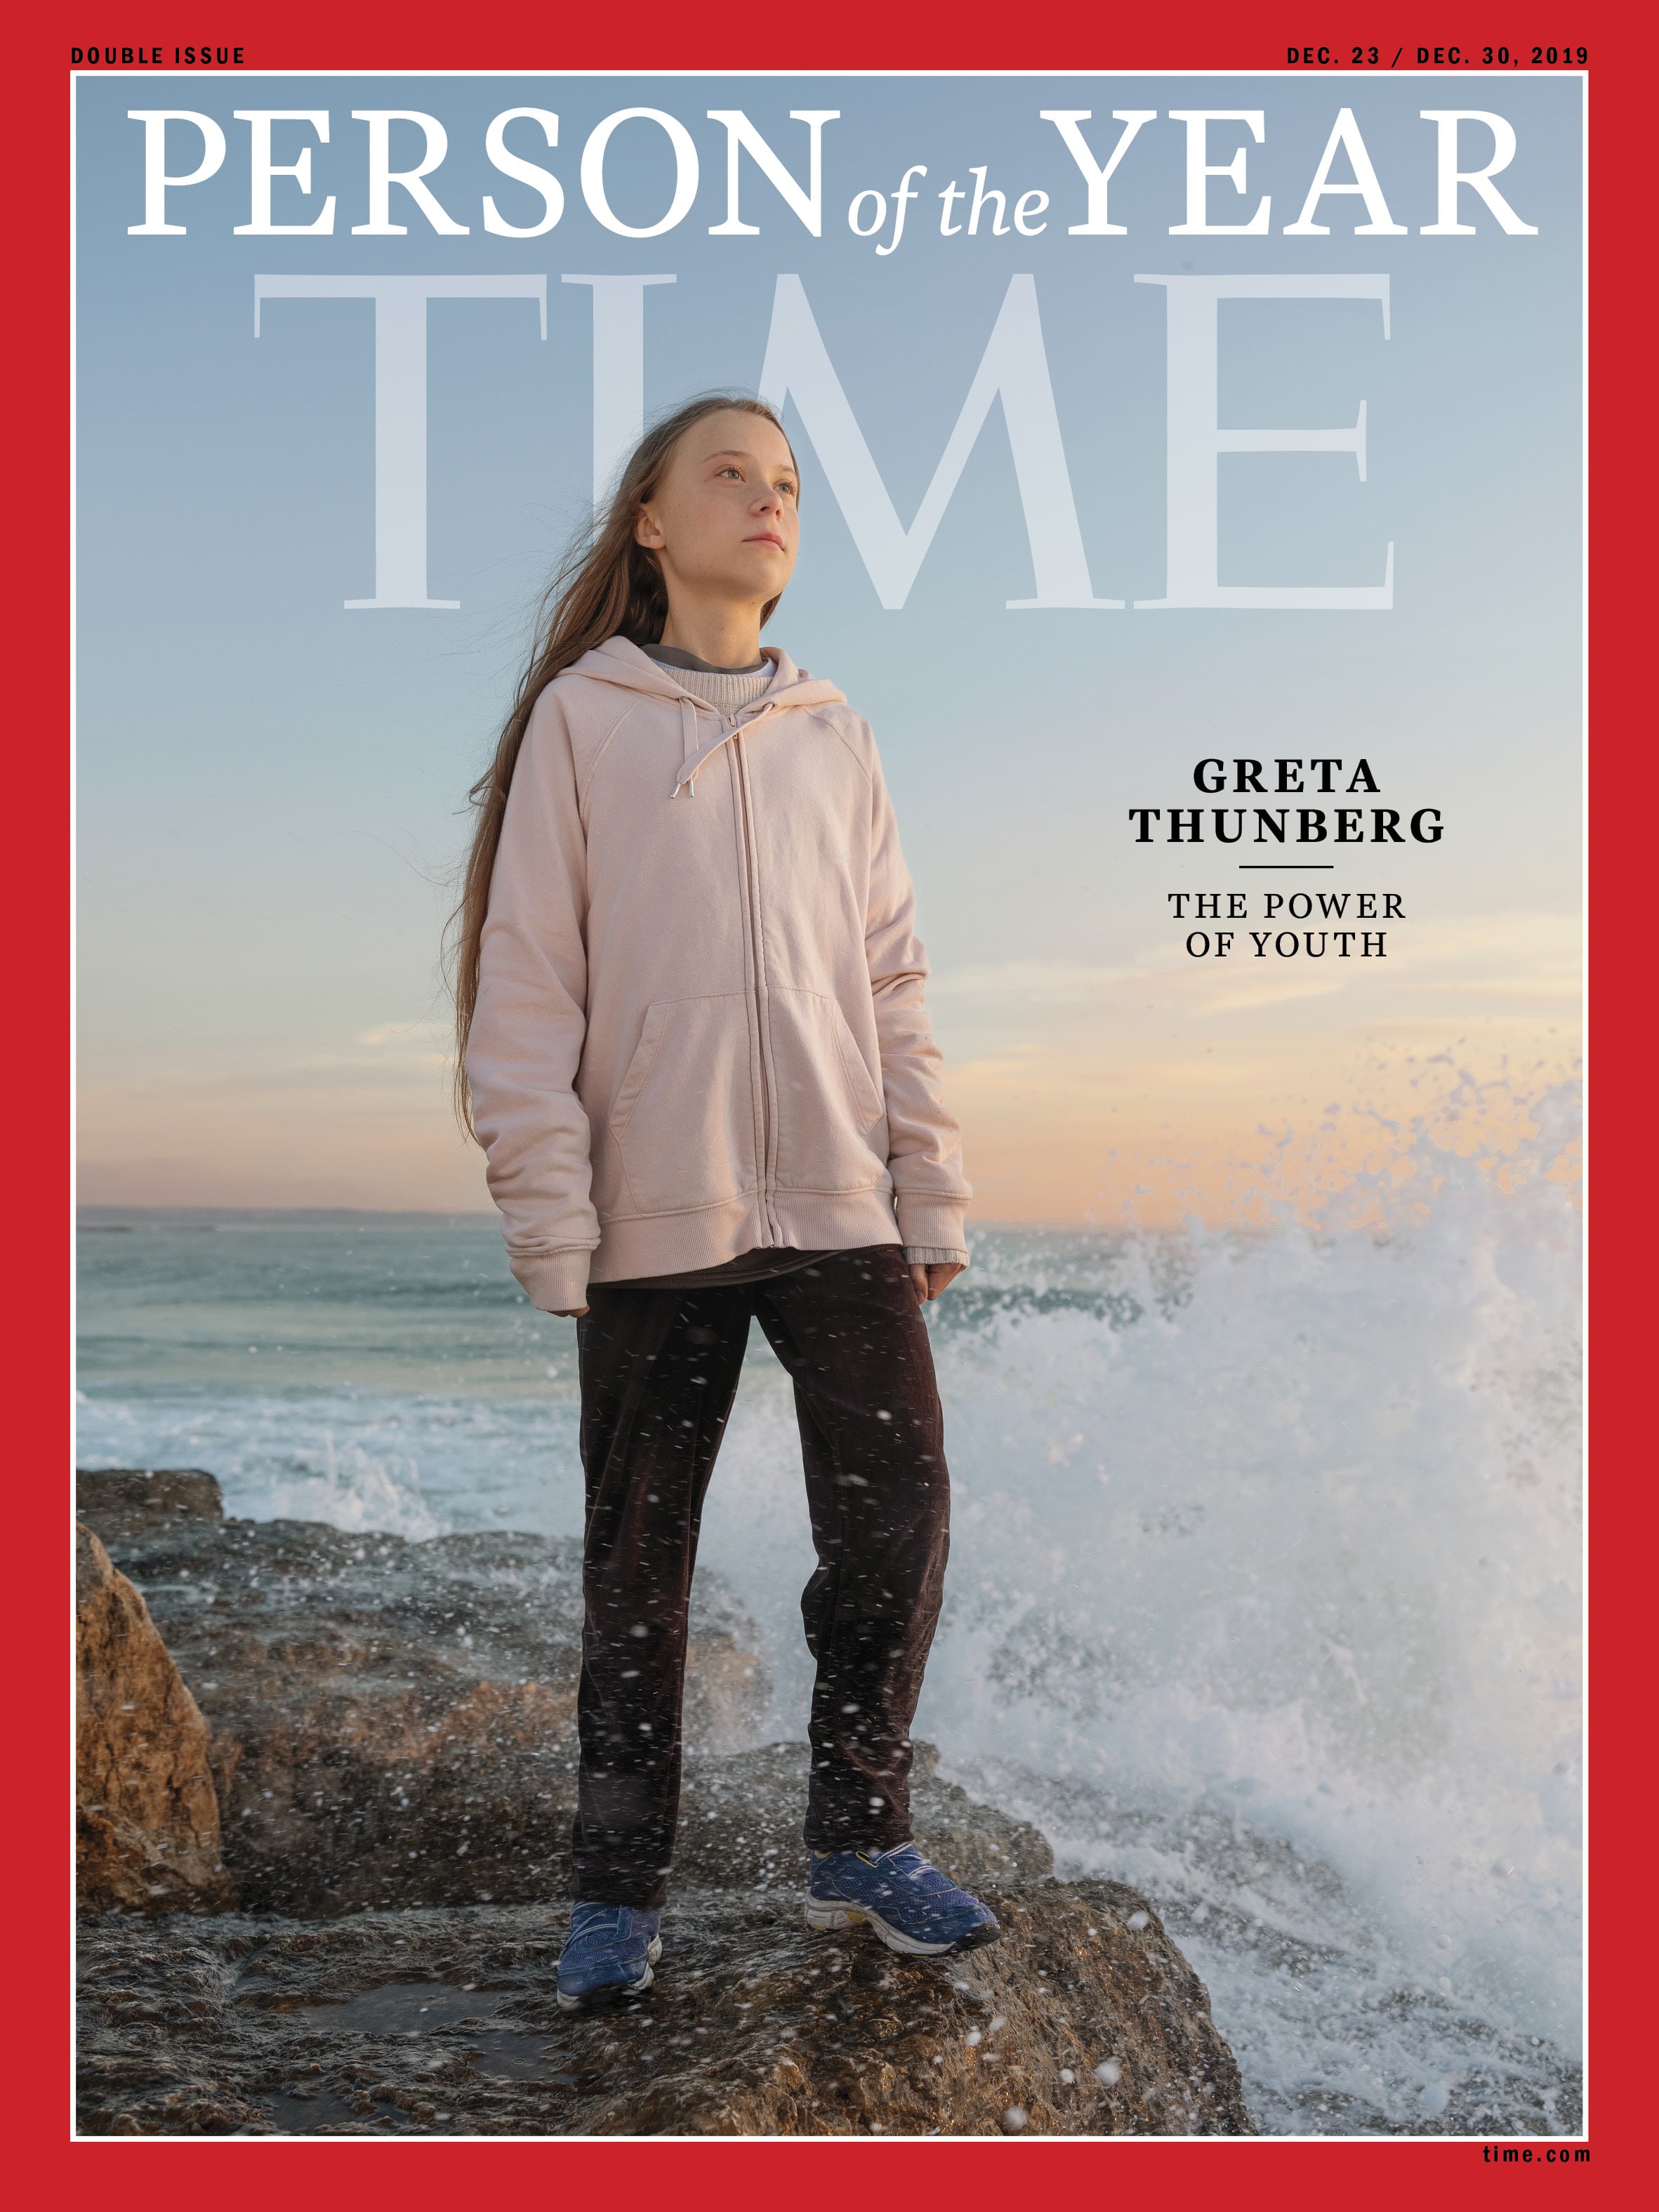 Greta Thunberg was recently named Time Magazine’s Person of the Year 